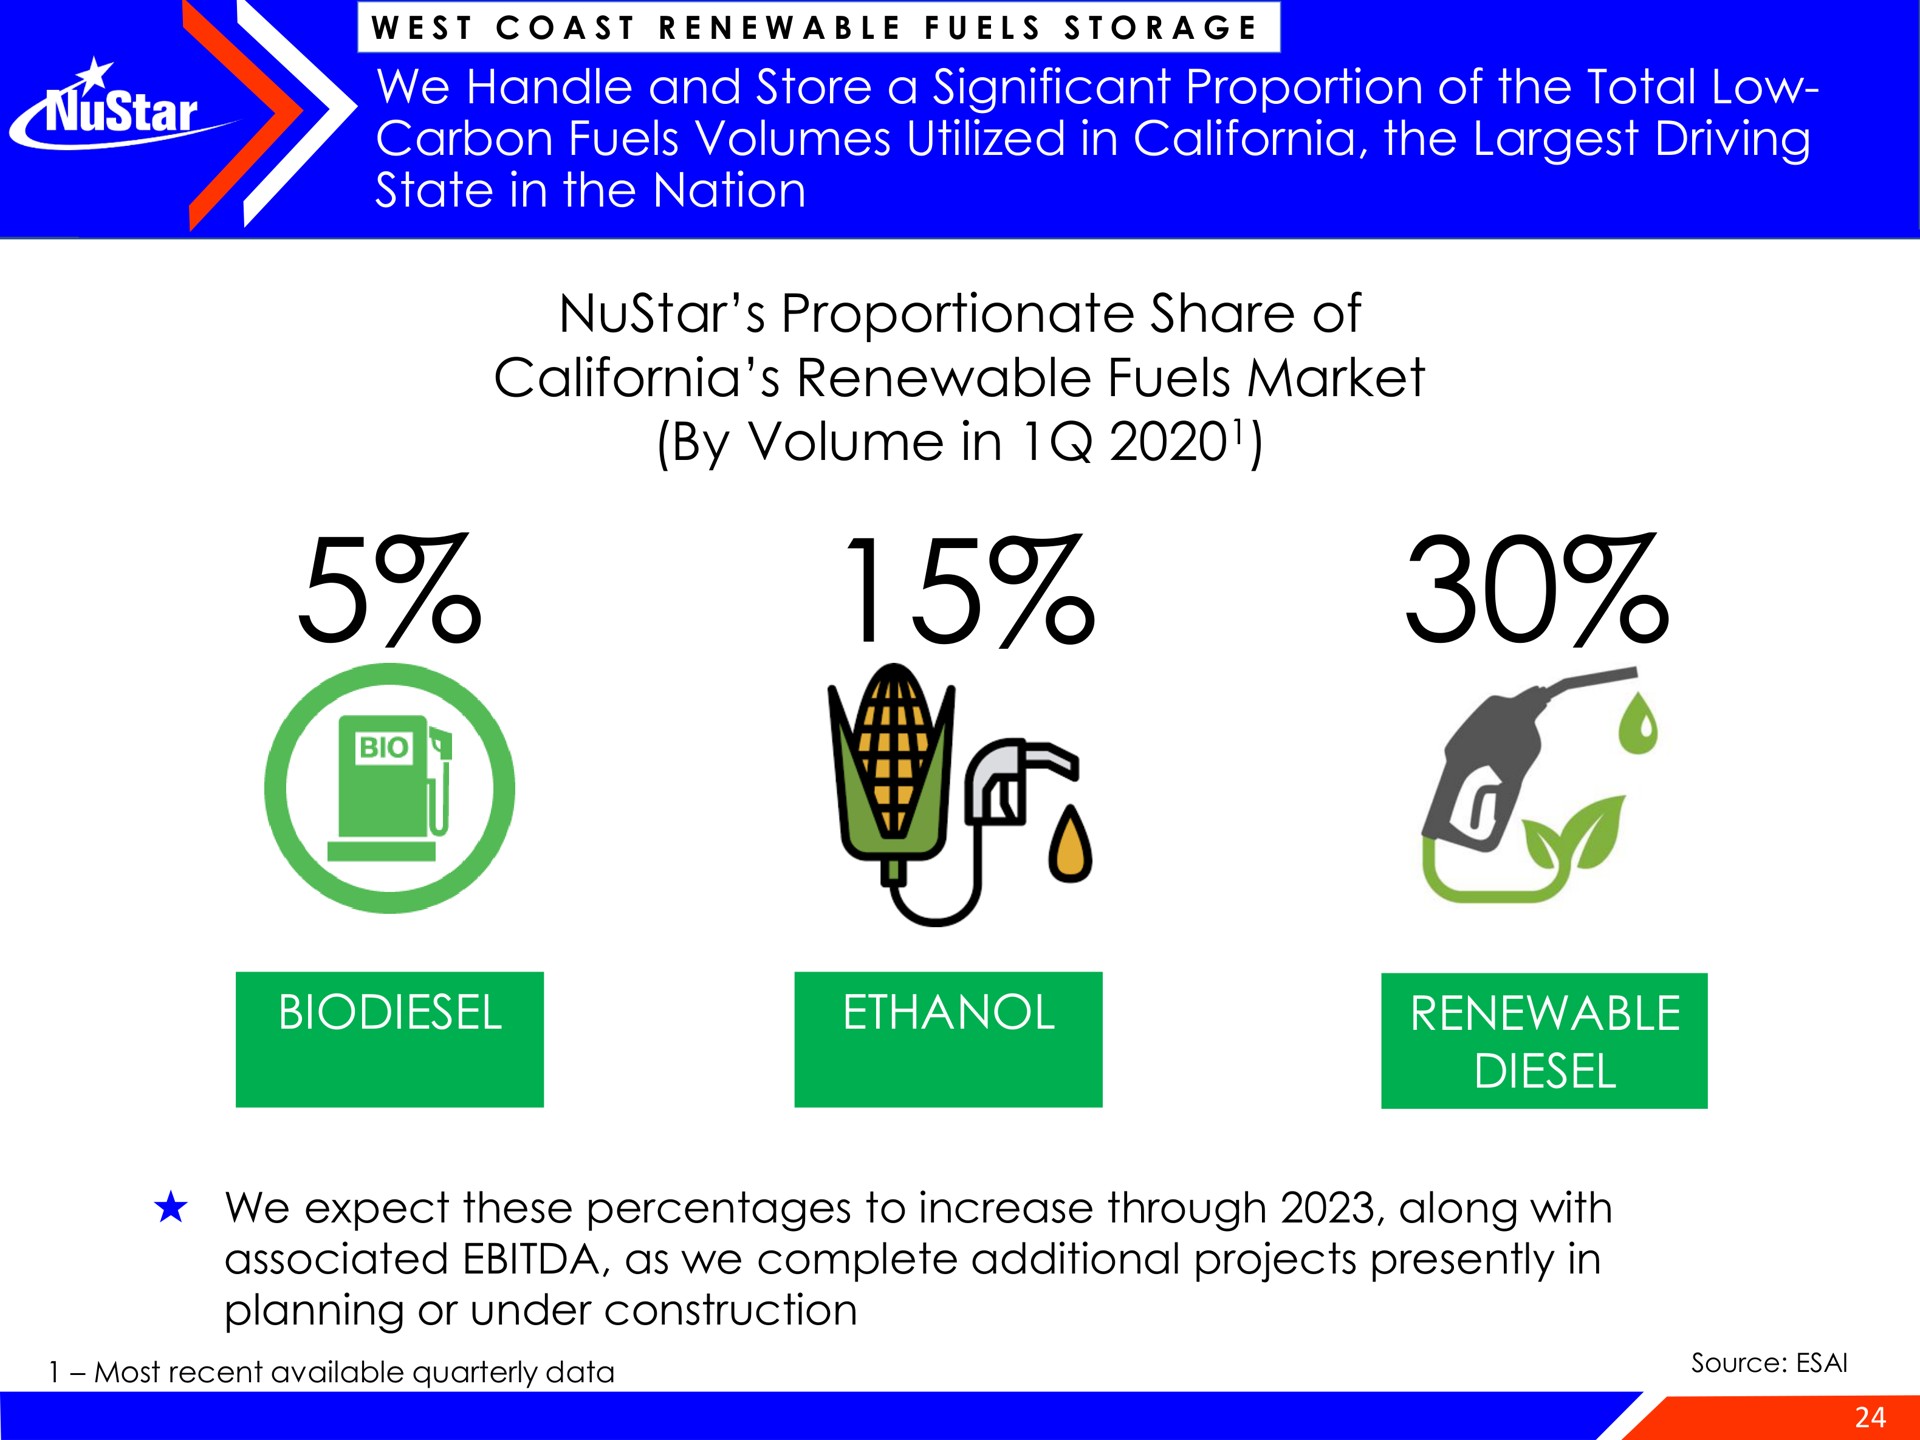 we handle and store a significant proportion of the total low carbon fuels volumes utilized in the driving state in the nation proportionate share of renewable fuels market by volume in ethanol renewable diesel | NuStar Energy